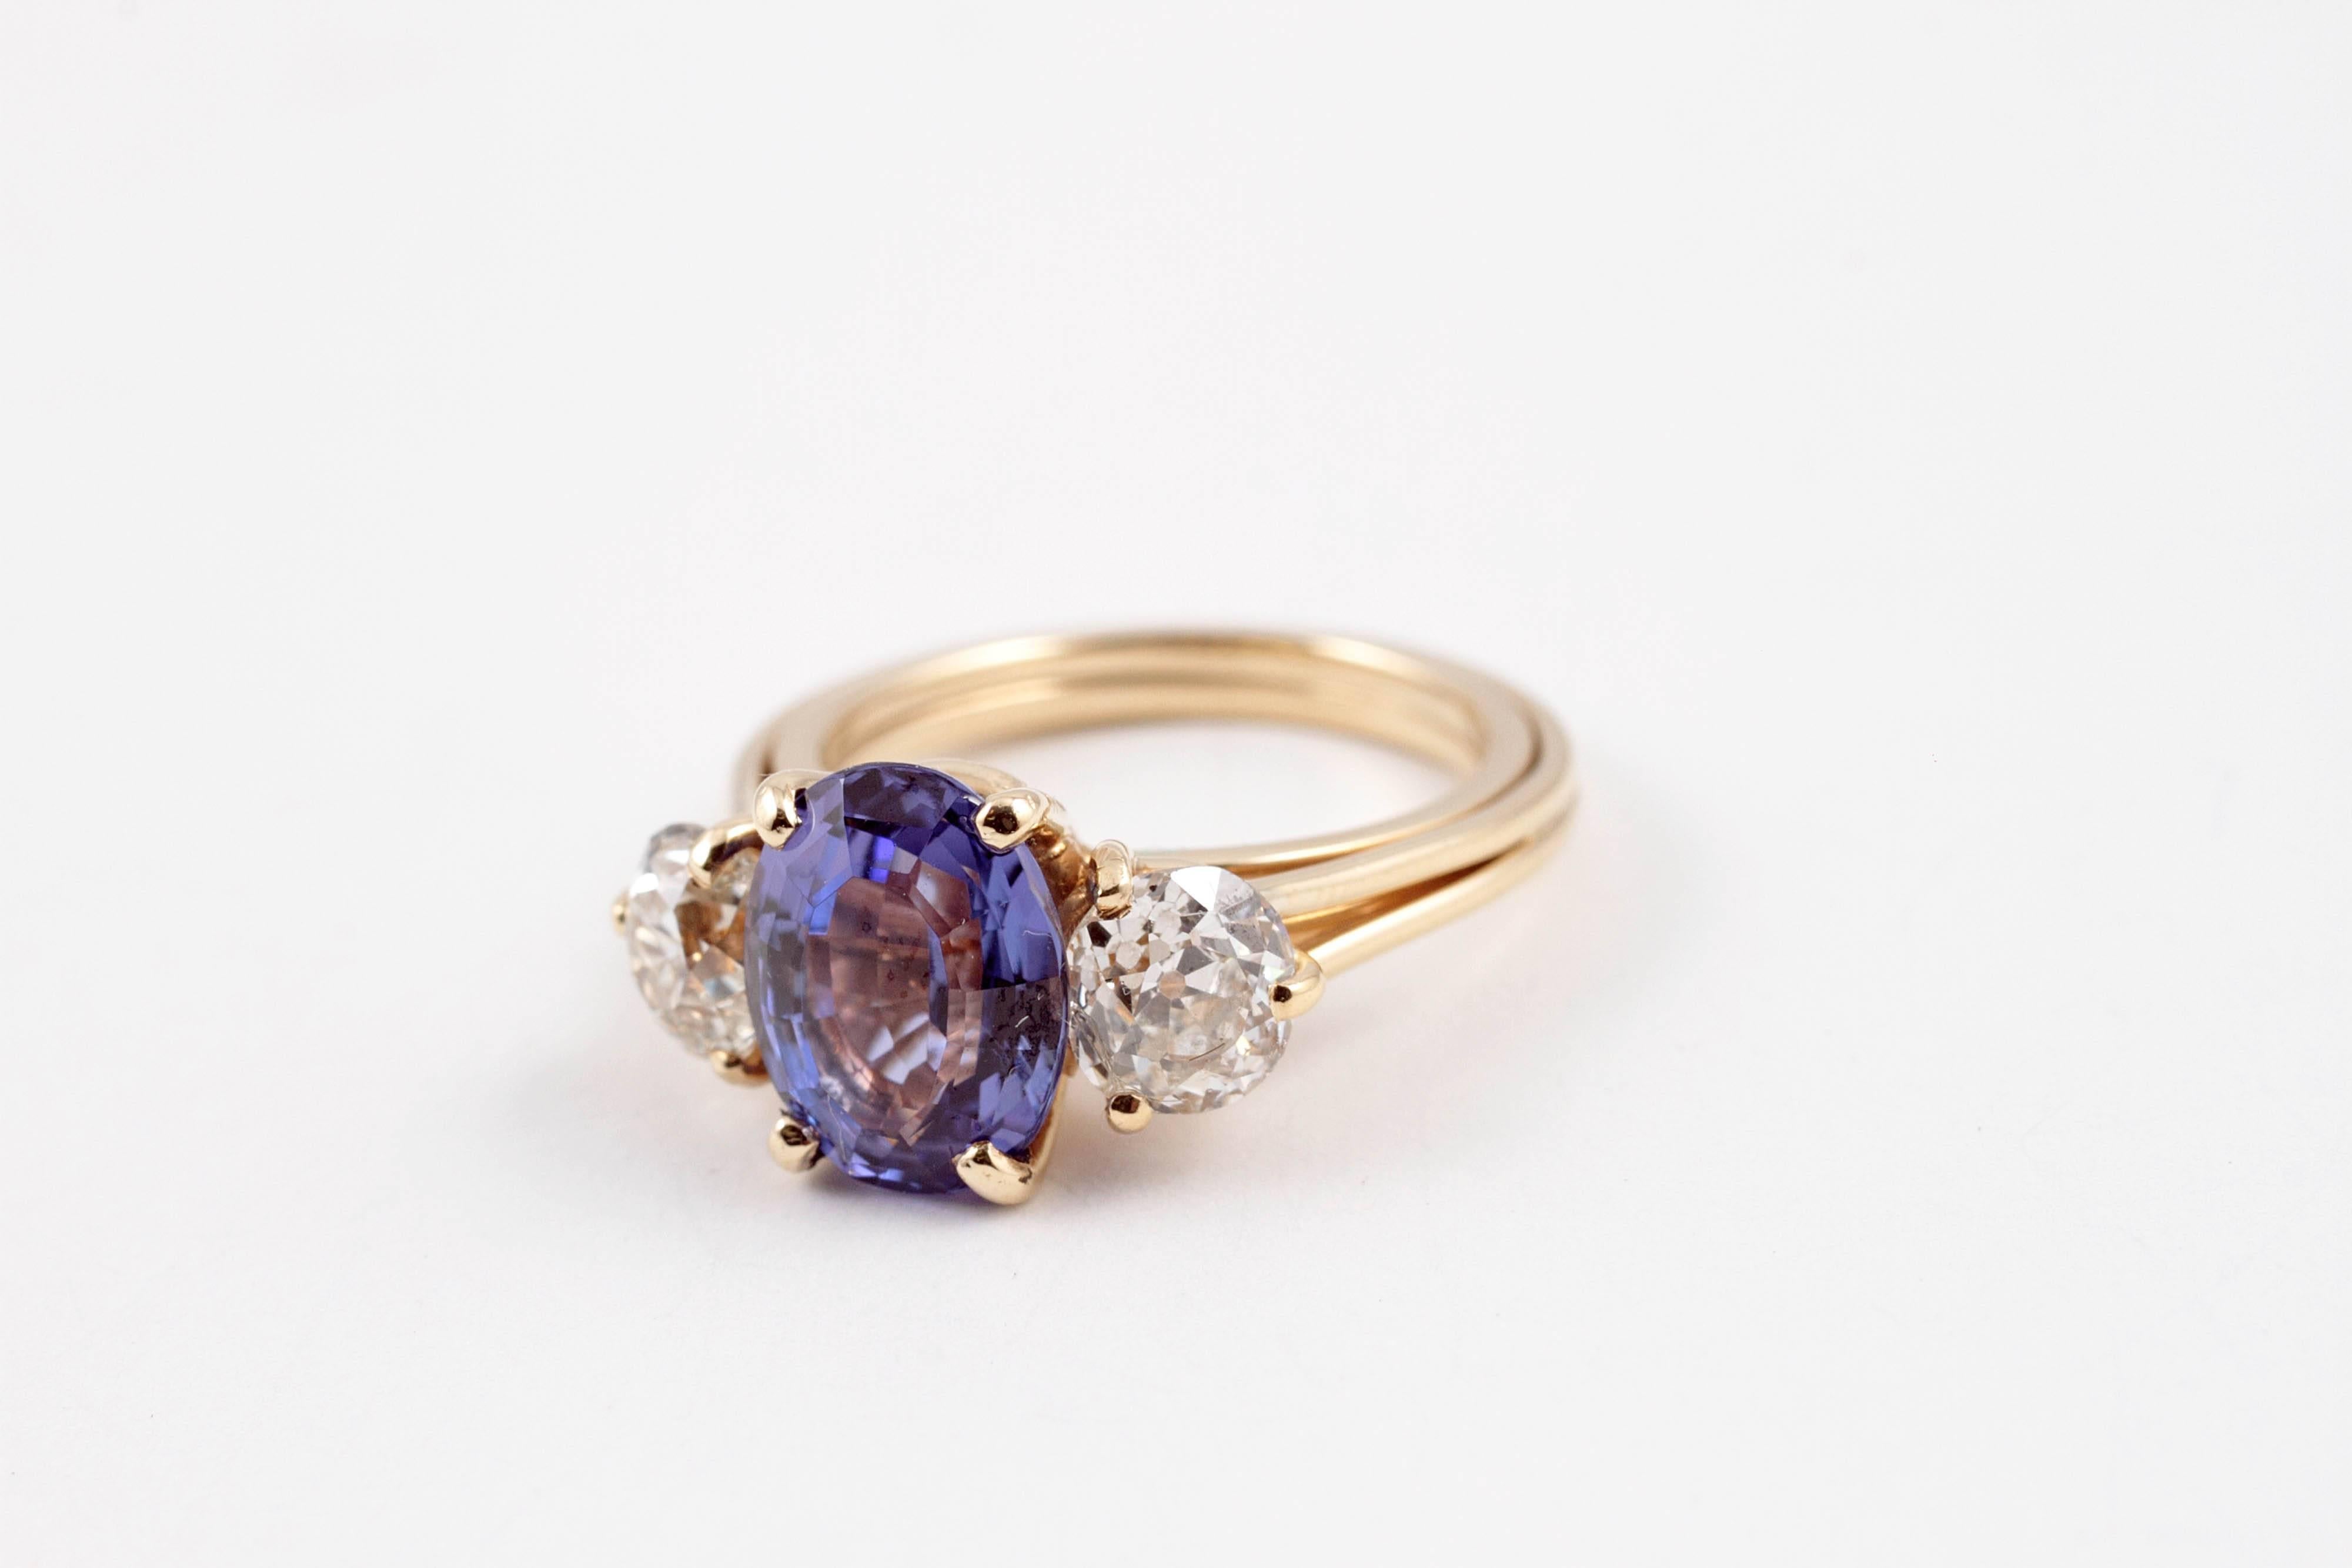 Breathtaking 2.96 ct Tanzanite and 1.50 carat old European-cut diamonds!  In 18 karat yellow gold contemporary mounting, it is just fabulous to see and behold!  Size 5.50, sure to make anyone happy to find this under the tree!